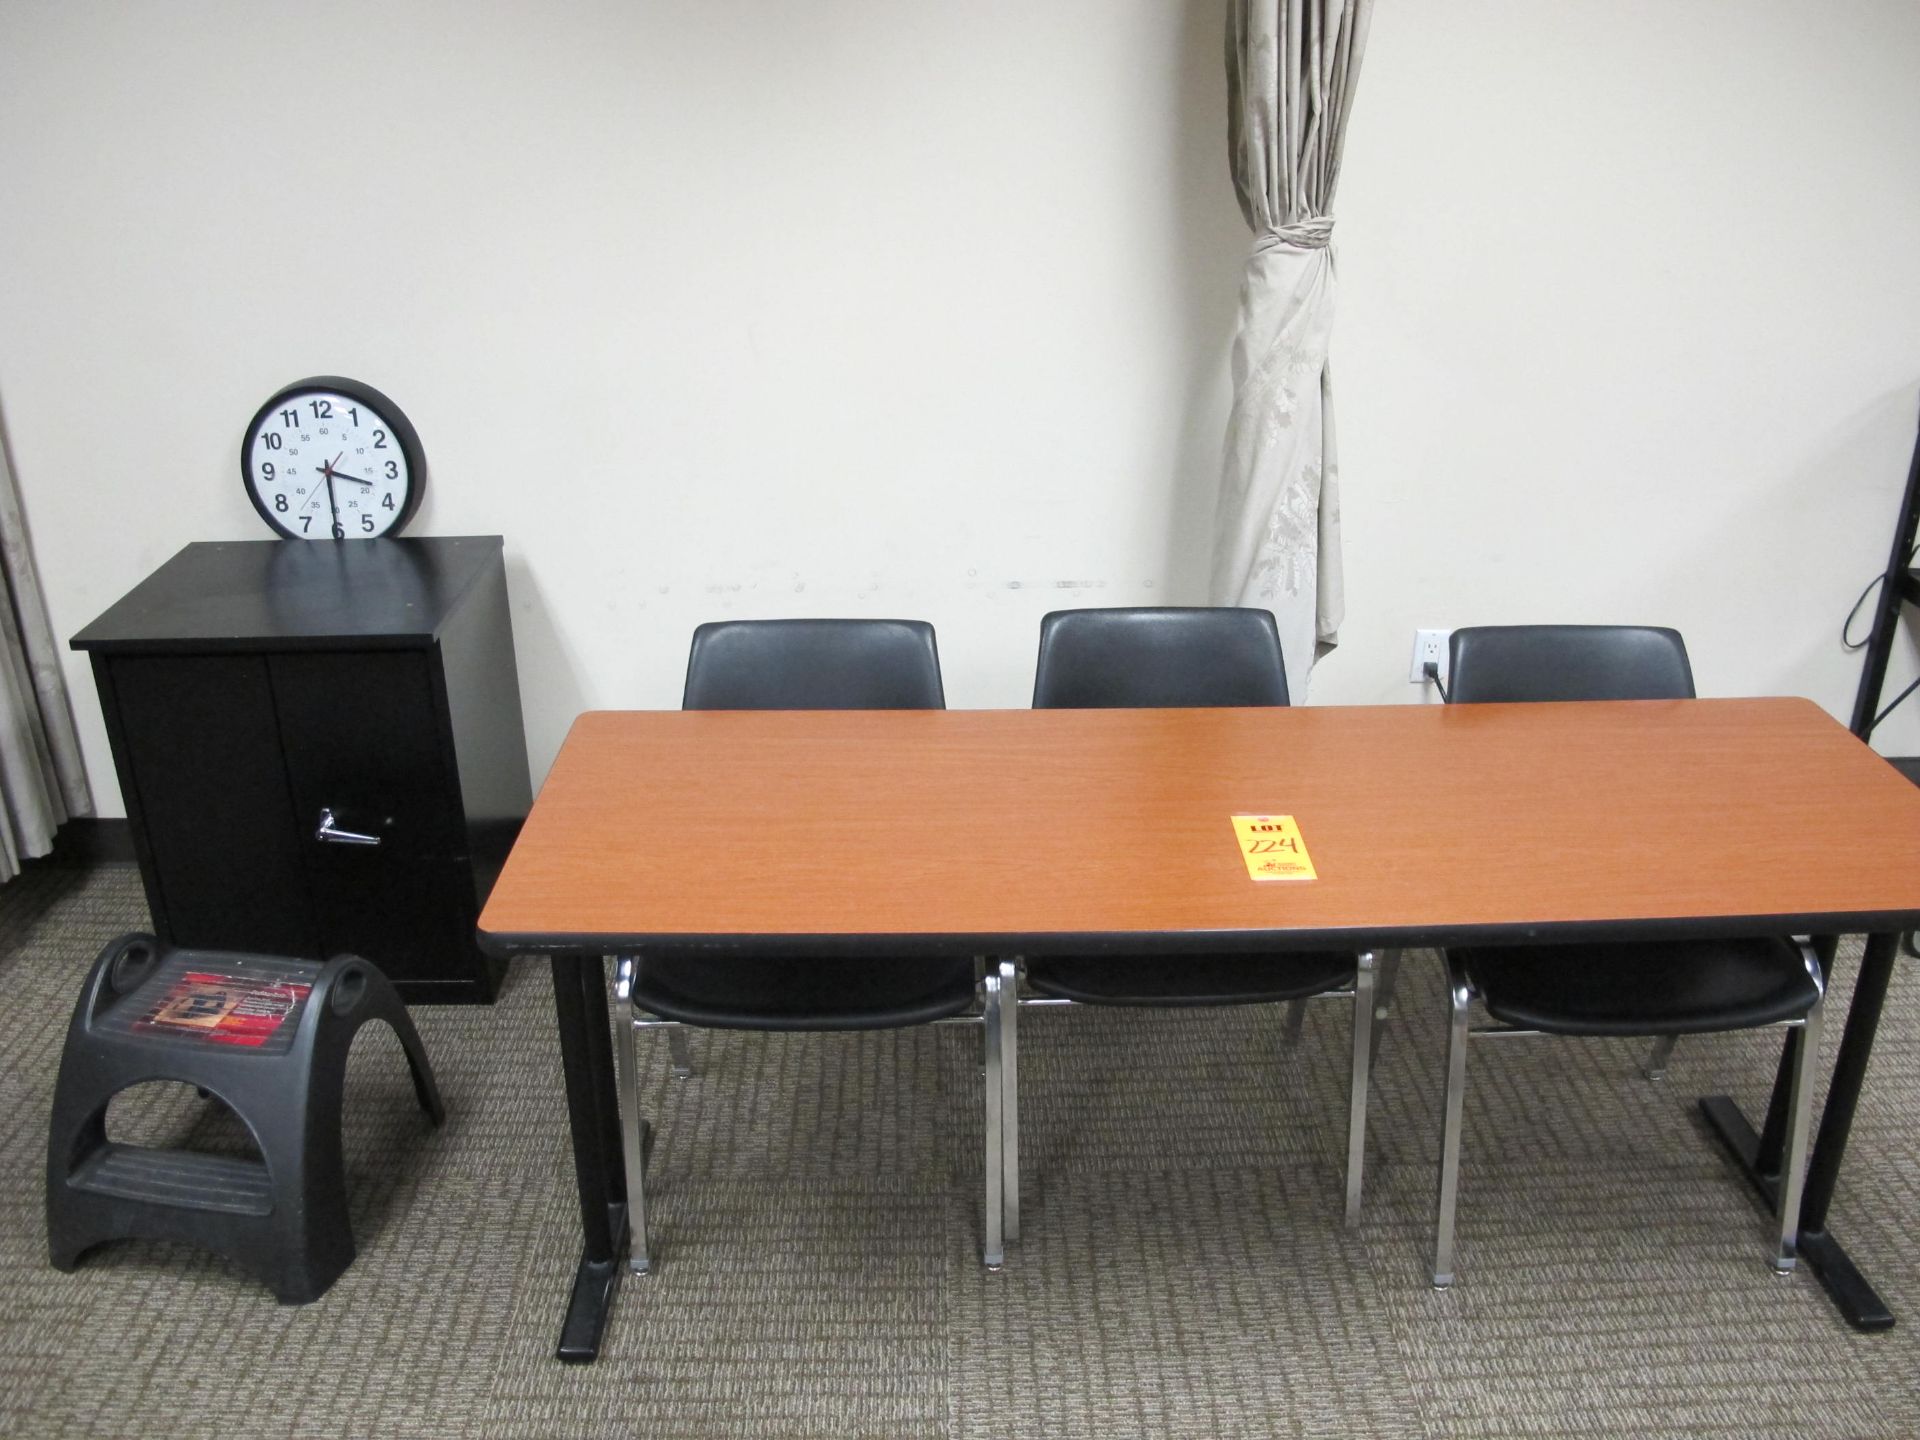 Teacher's Station including 6ft. X 2ft. Work Table, 3 Chairs, Audio/Video Cabinet and Stool, Small